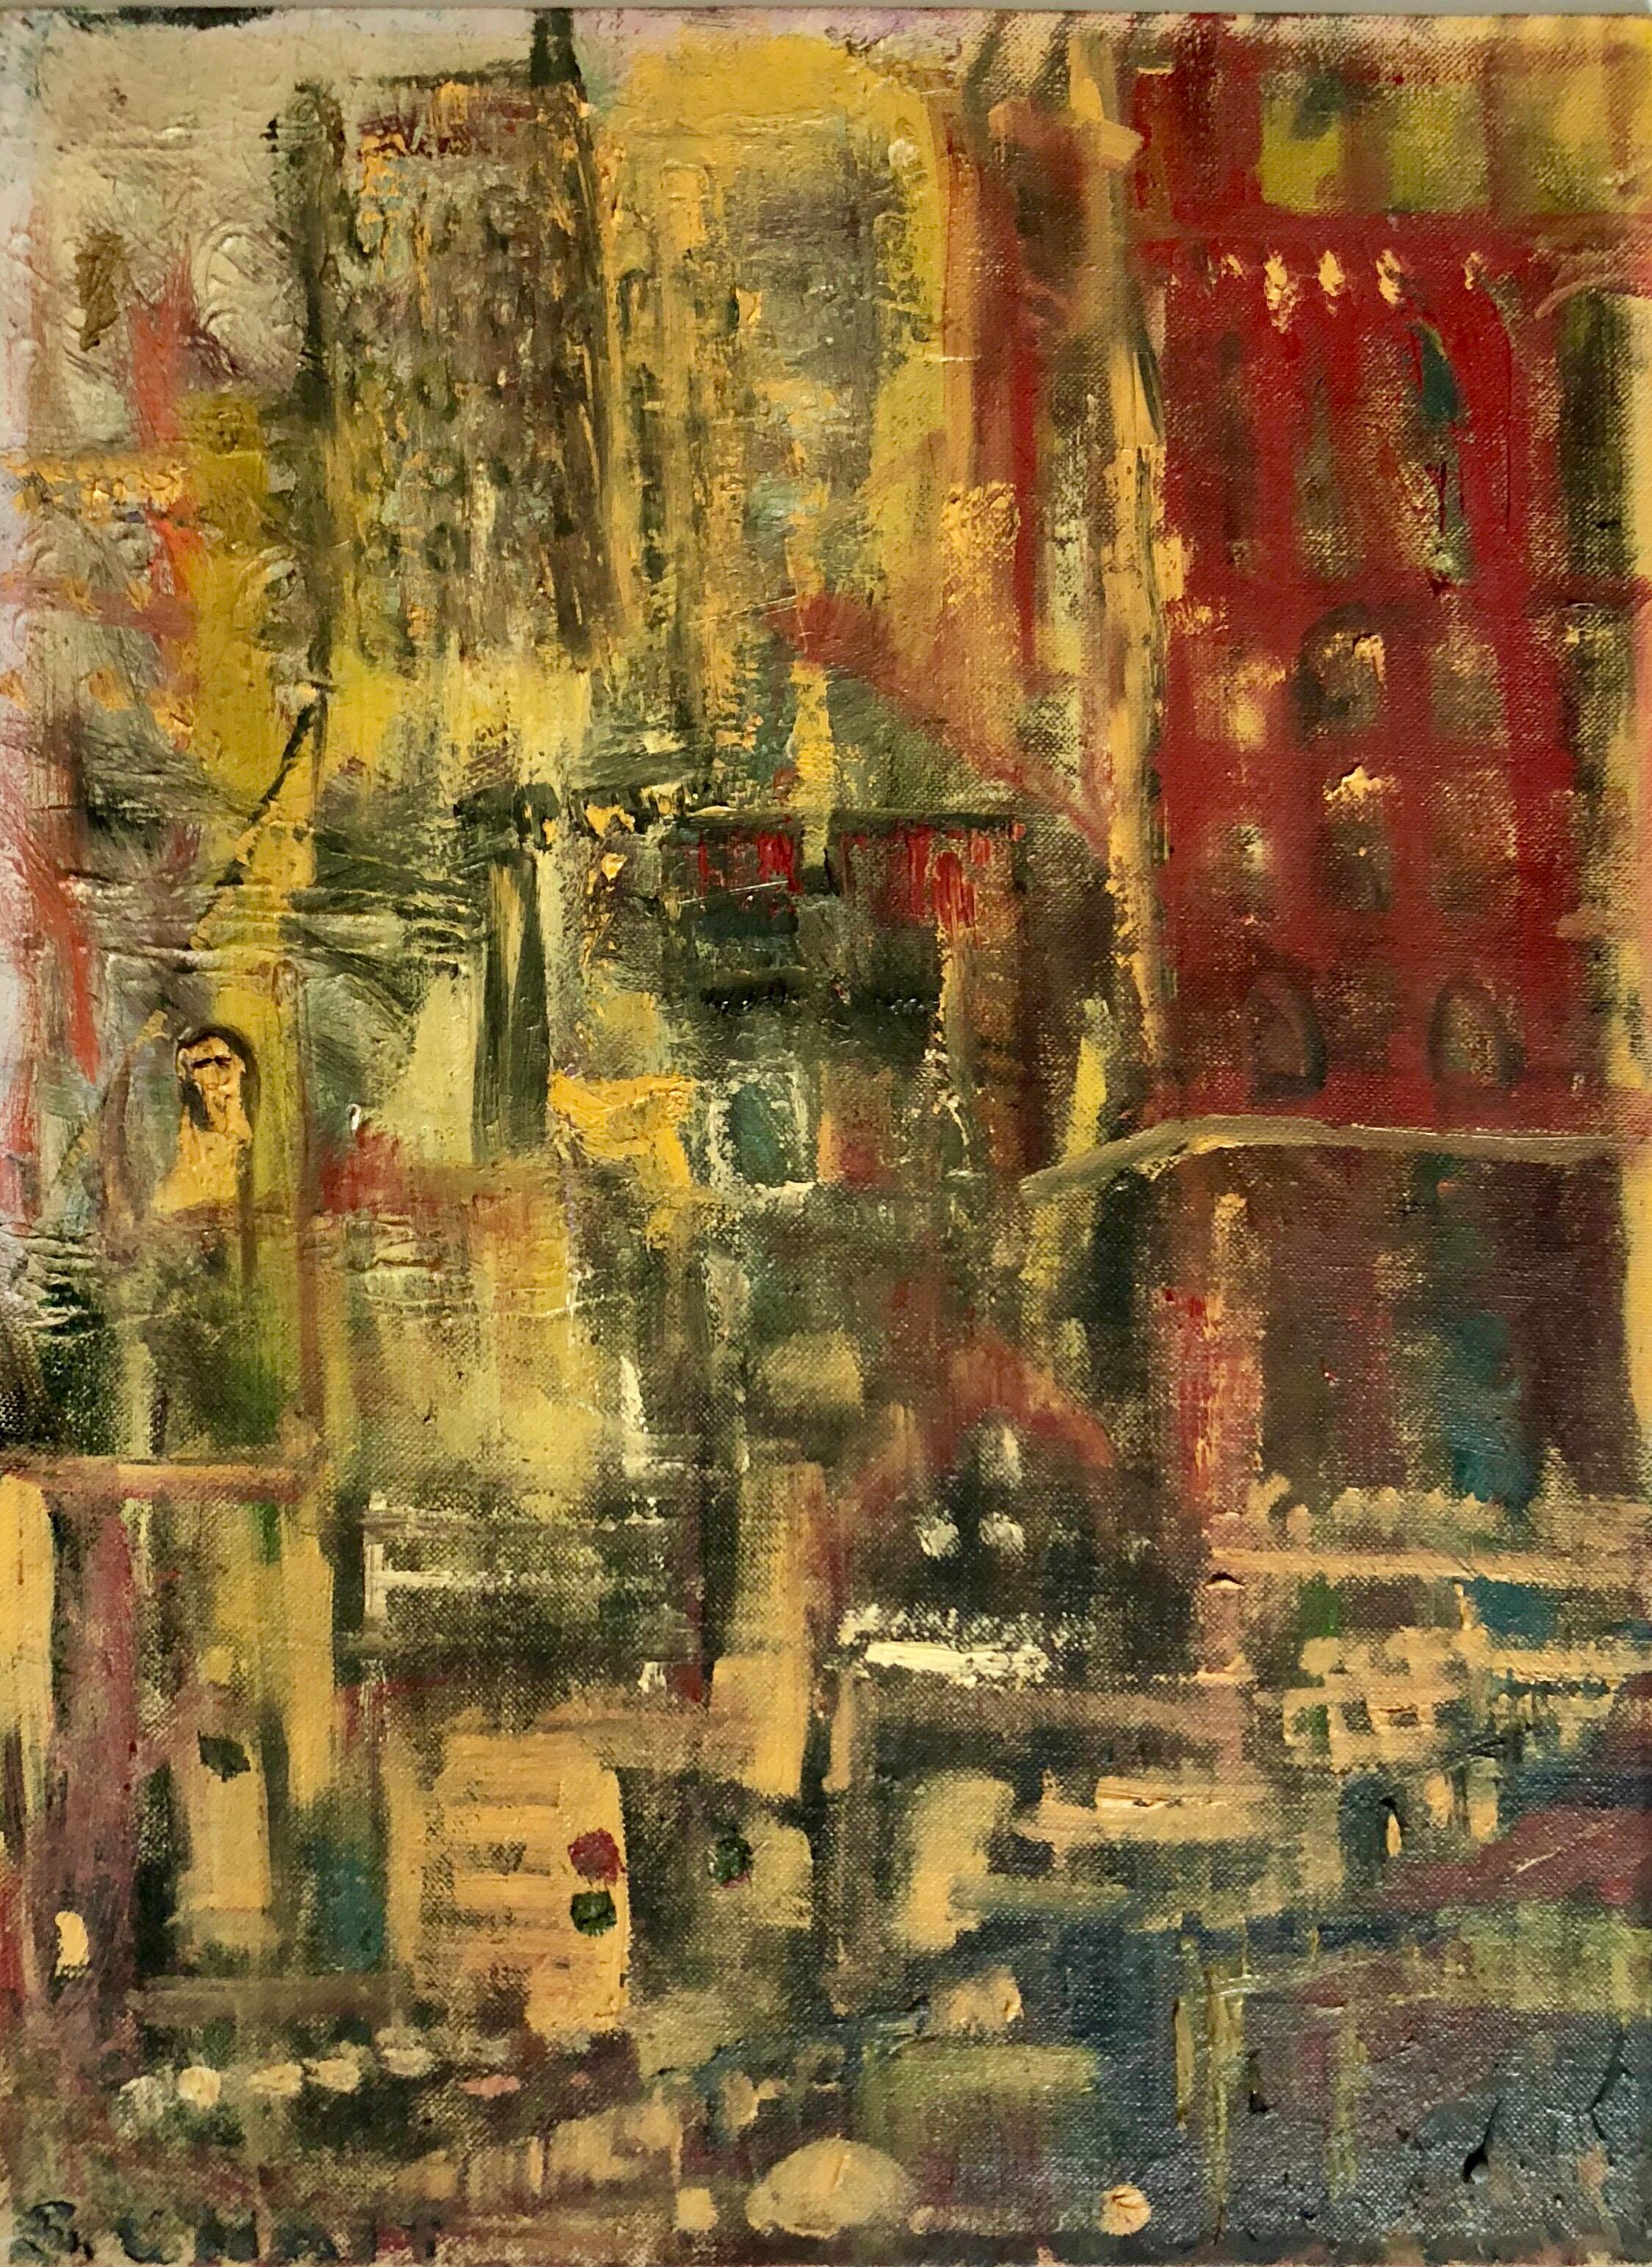 Unknown Landscape Painting - Abstract Cityscape 1960 Oil Painting Signed Chait Expressionist NYC City Scene